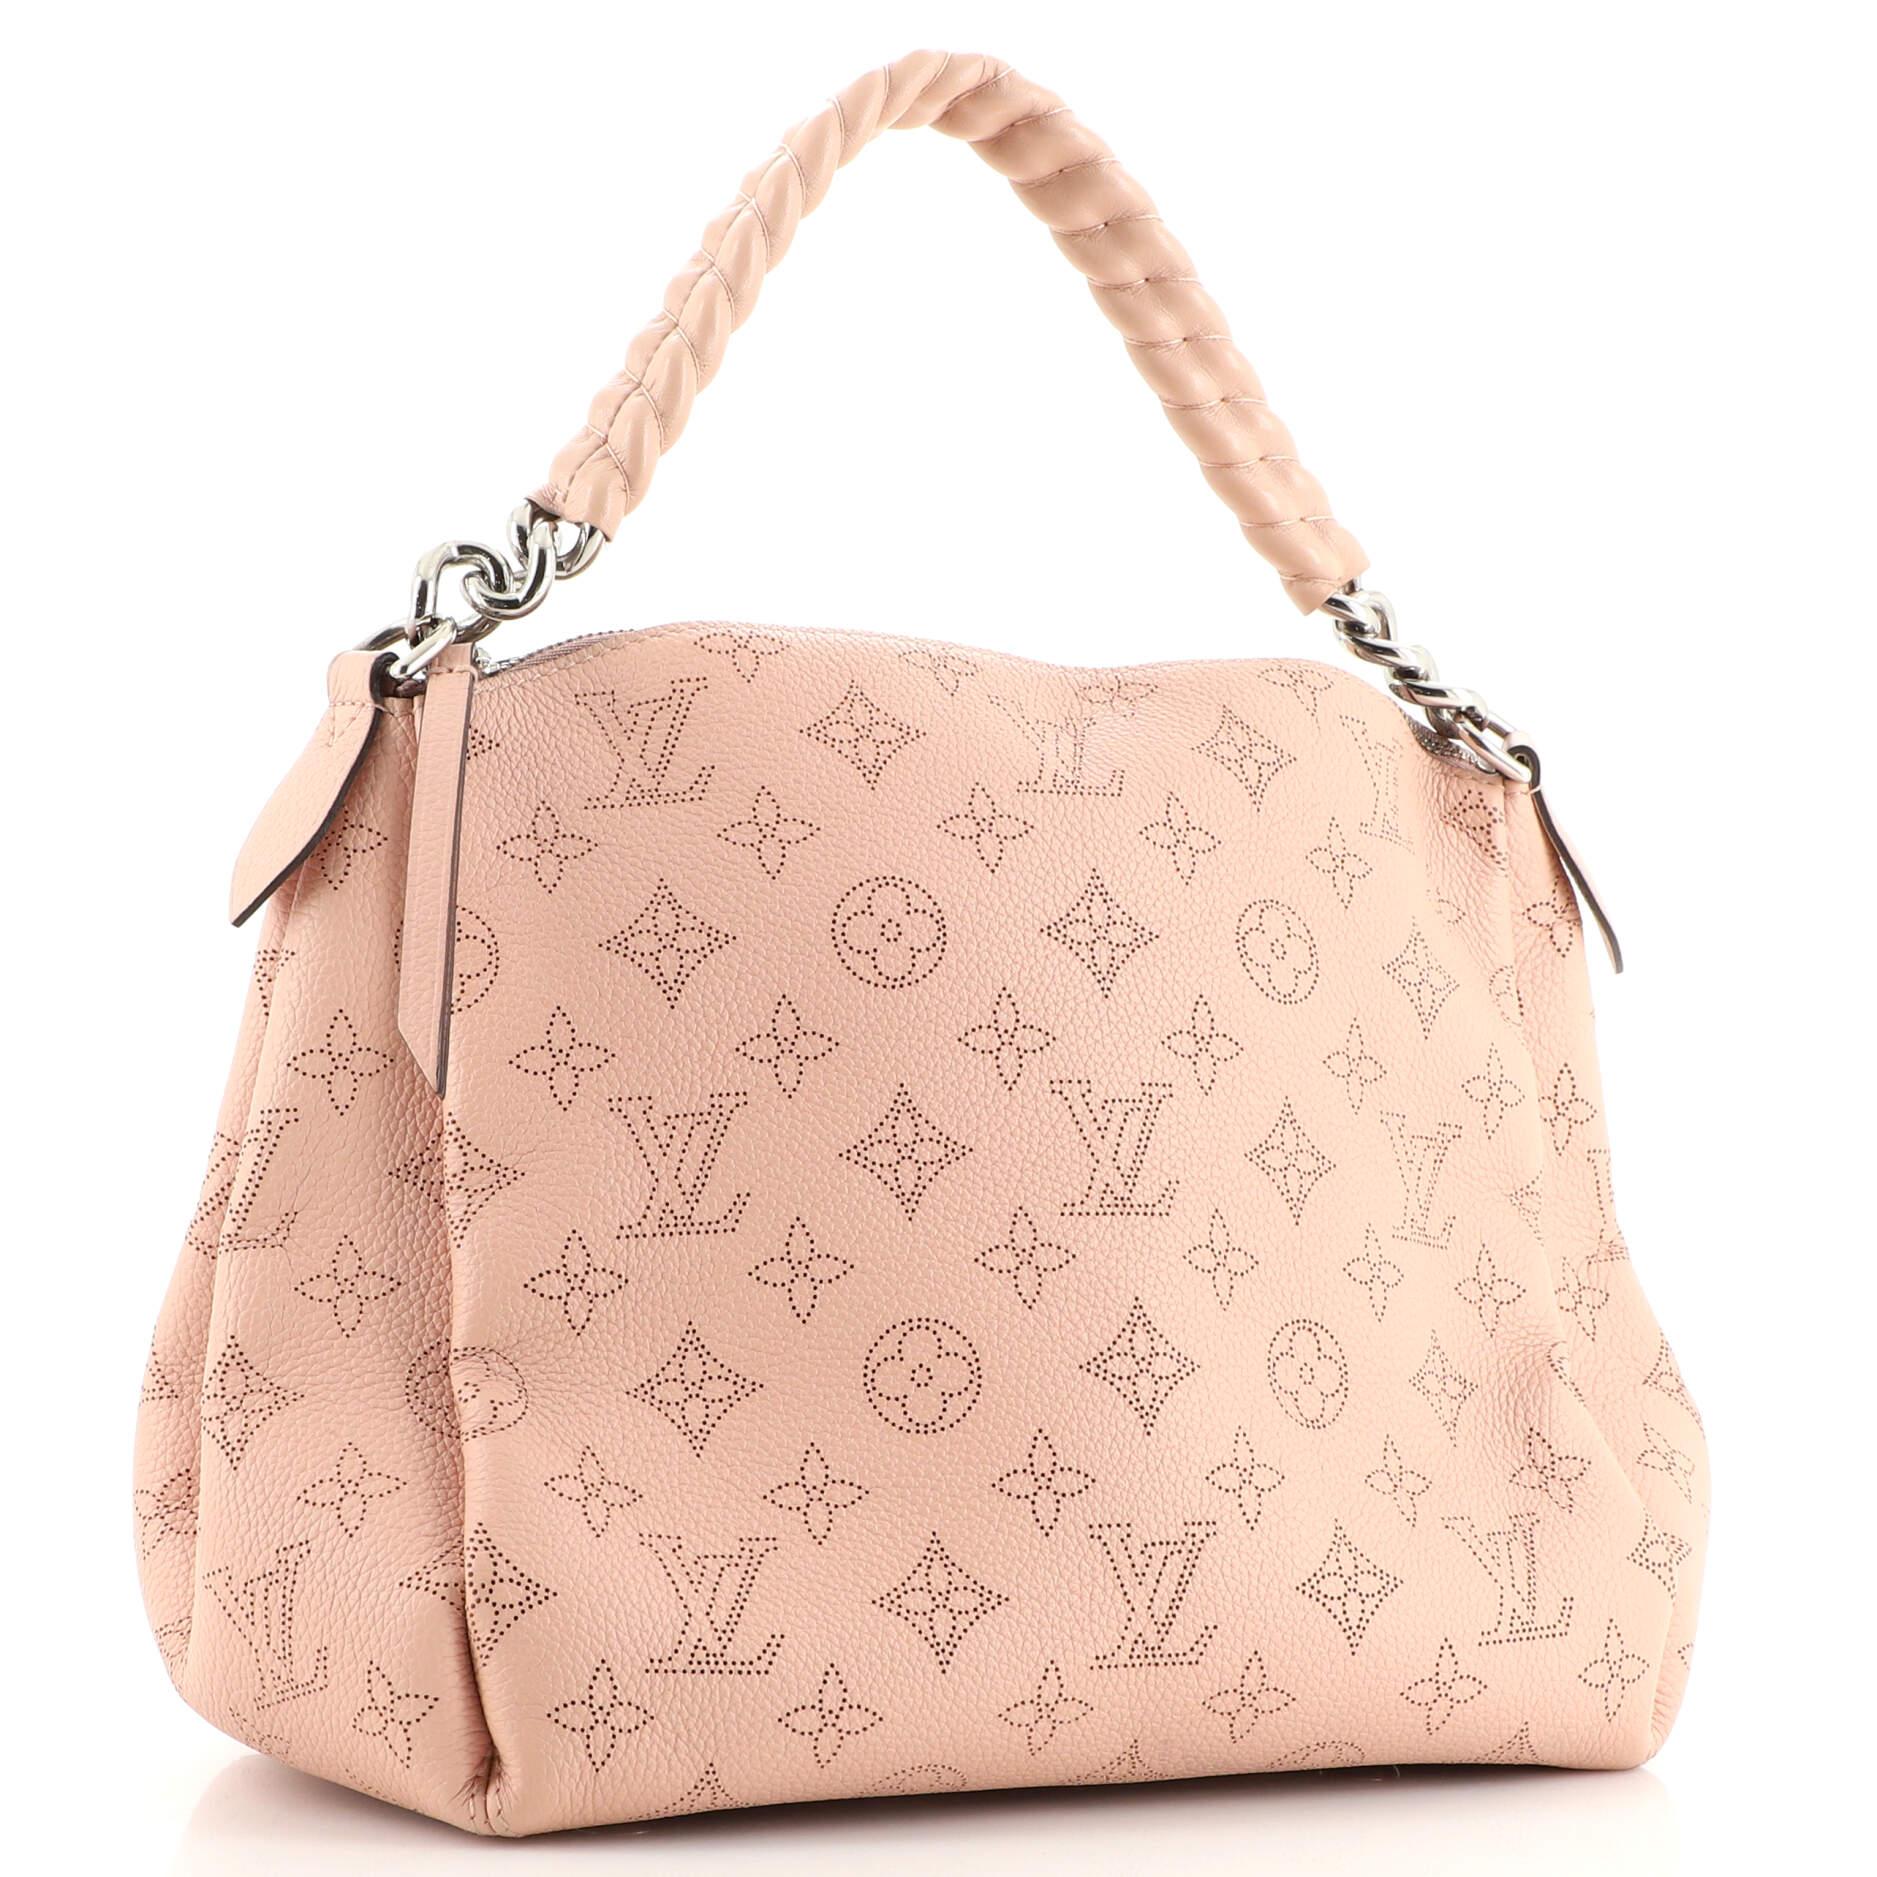 Louis Vuitton Babylone Mahina - 2 For Sale on 1stDibs  louis vuitton  mahina babylone, lv babylone bag, lv babylone